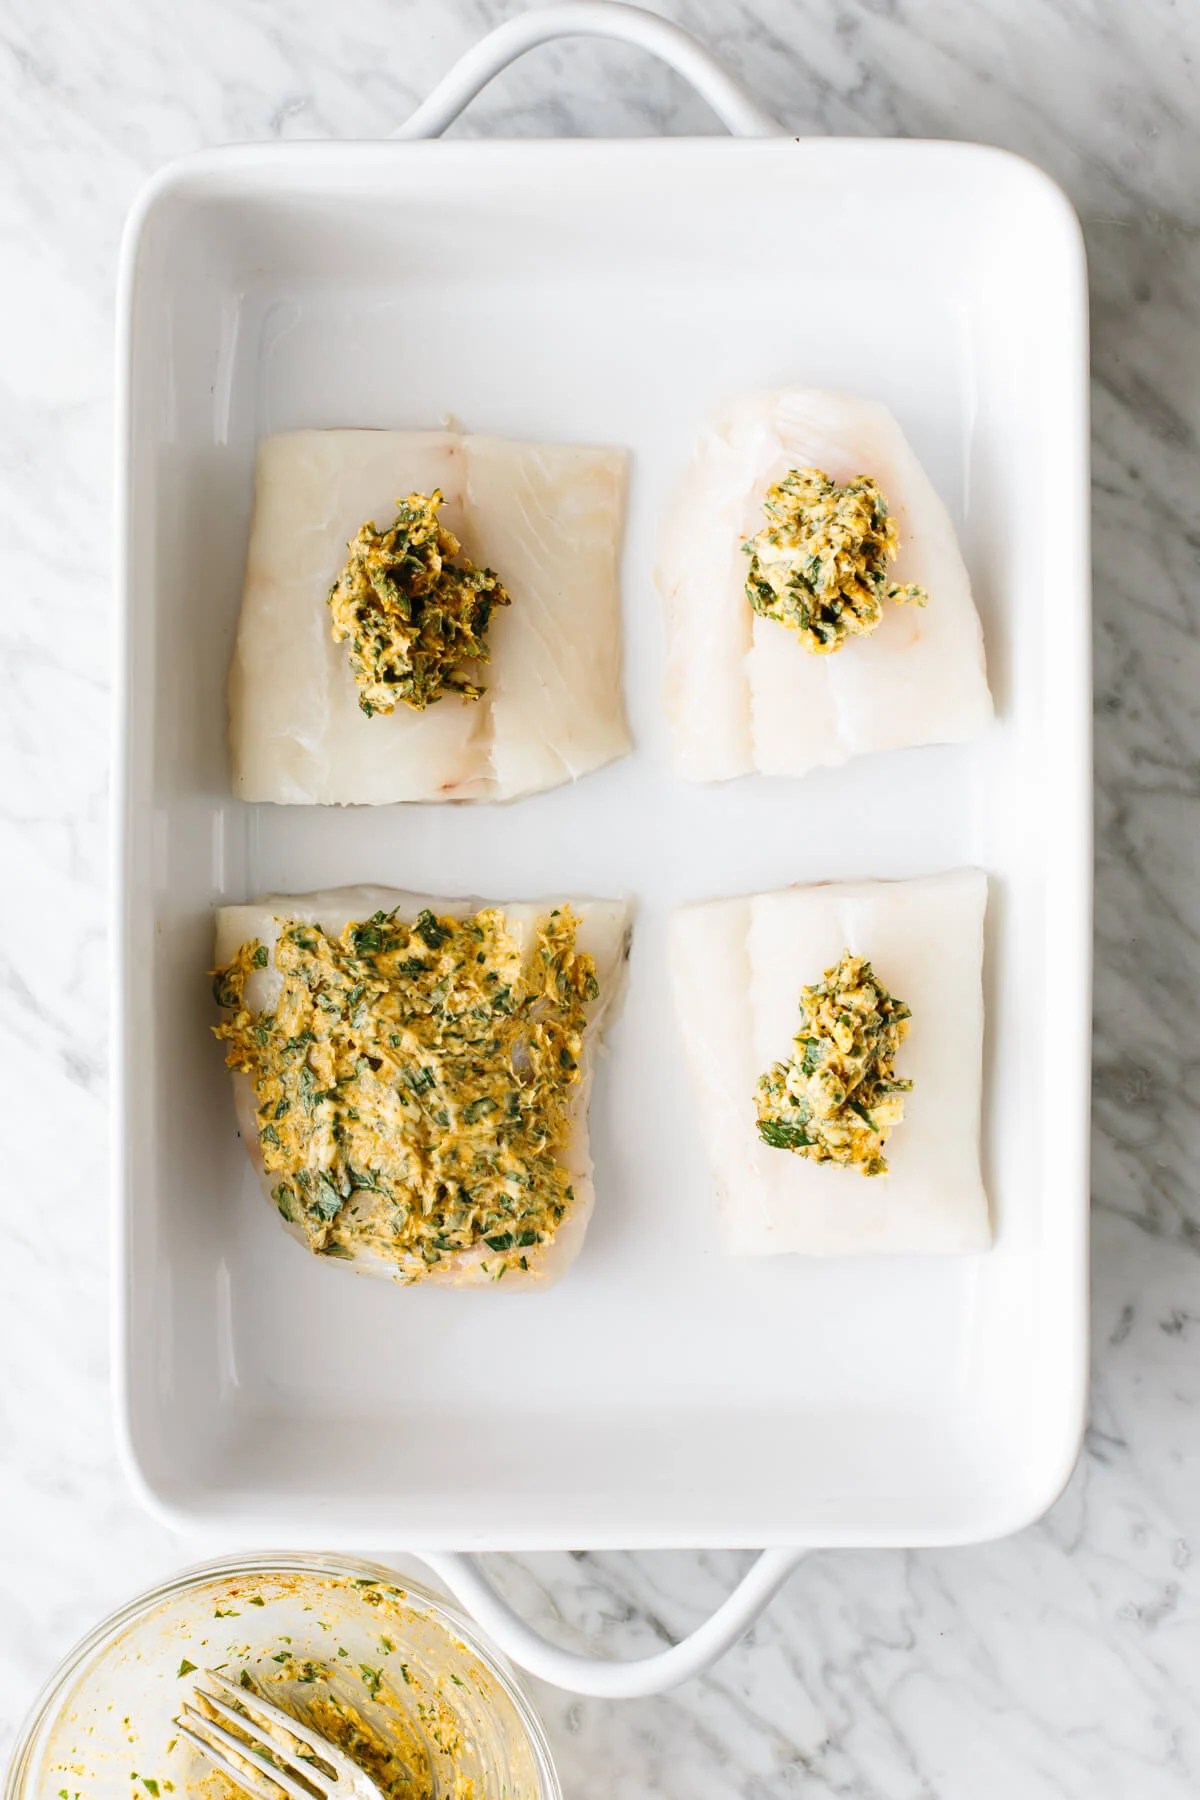 Topping cod fillets with garlic herb butter mixture.